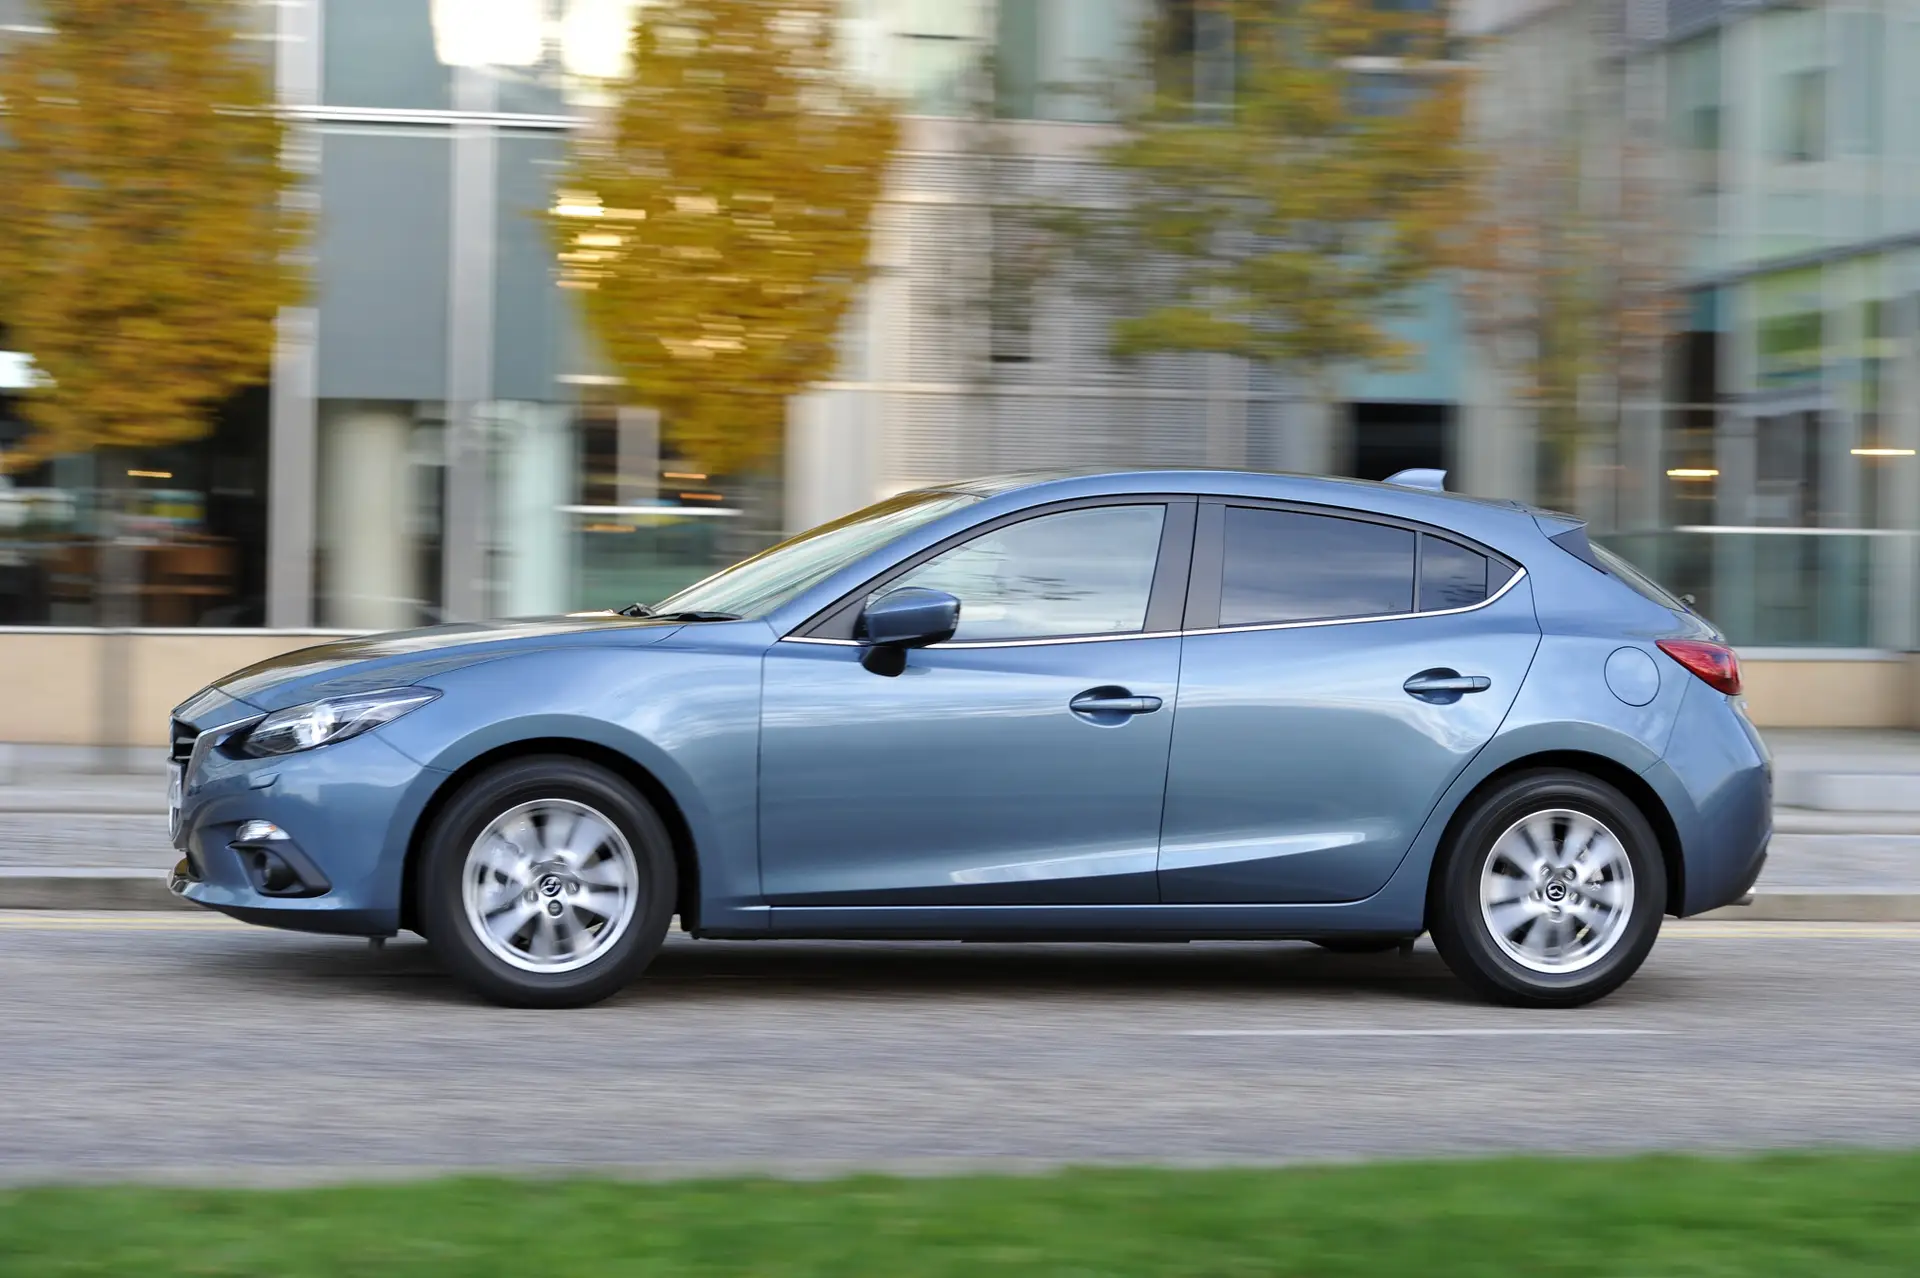 Mazda 3 (2014-2019) Review: exterior side photo of the Mazda 3 on the road